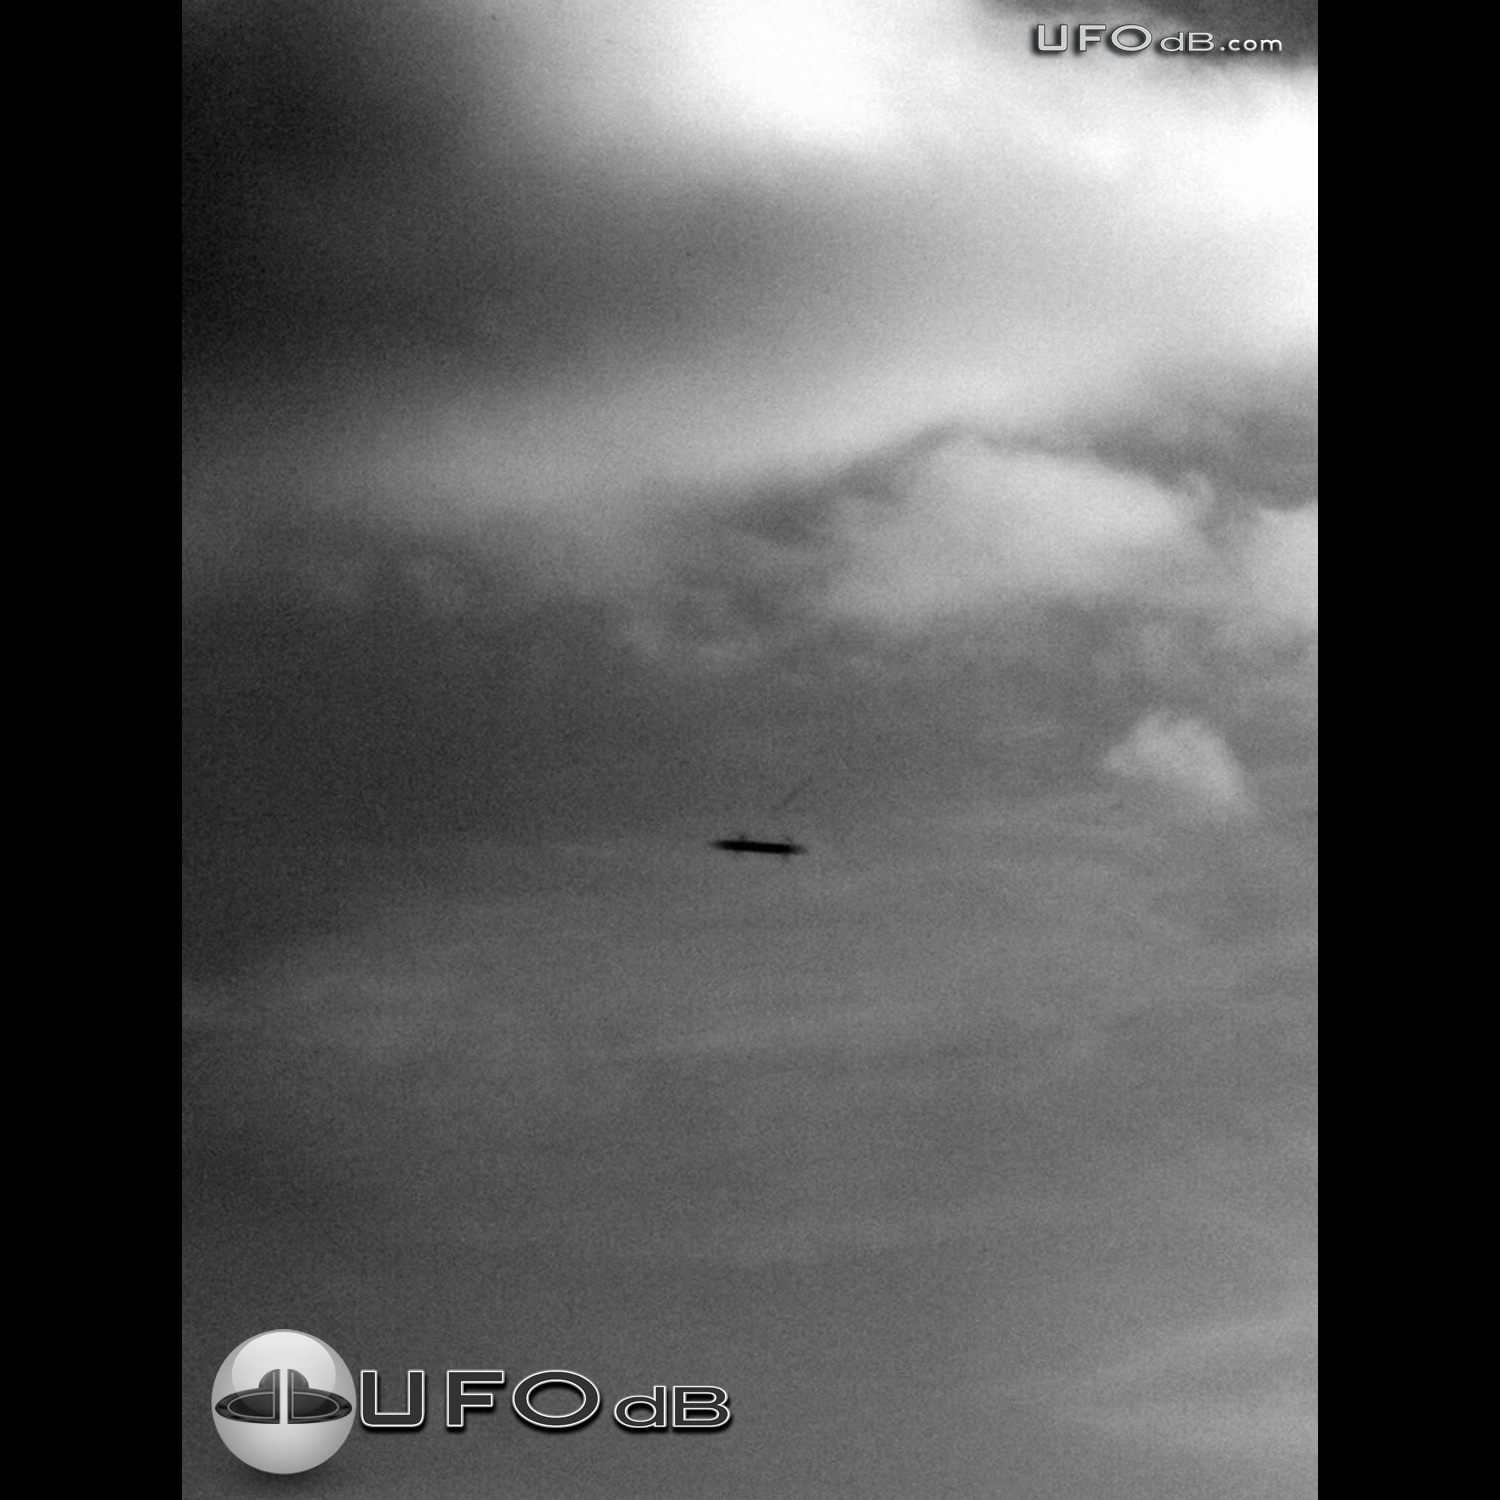 Dark Winged Saucer UFO over the town of Havant, England | April 7 2011 UFO Picture #263-1